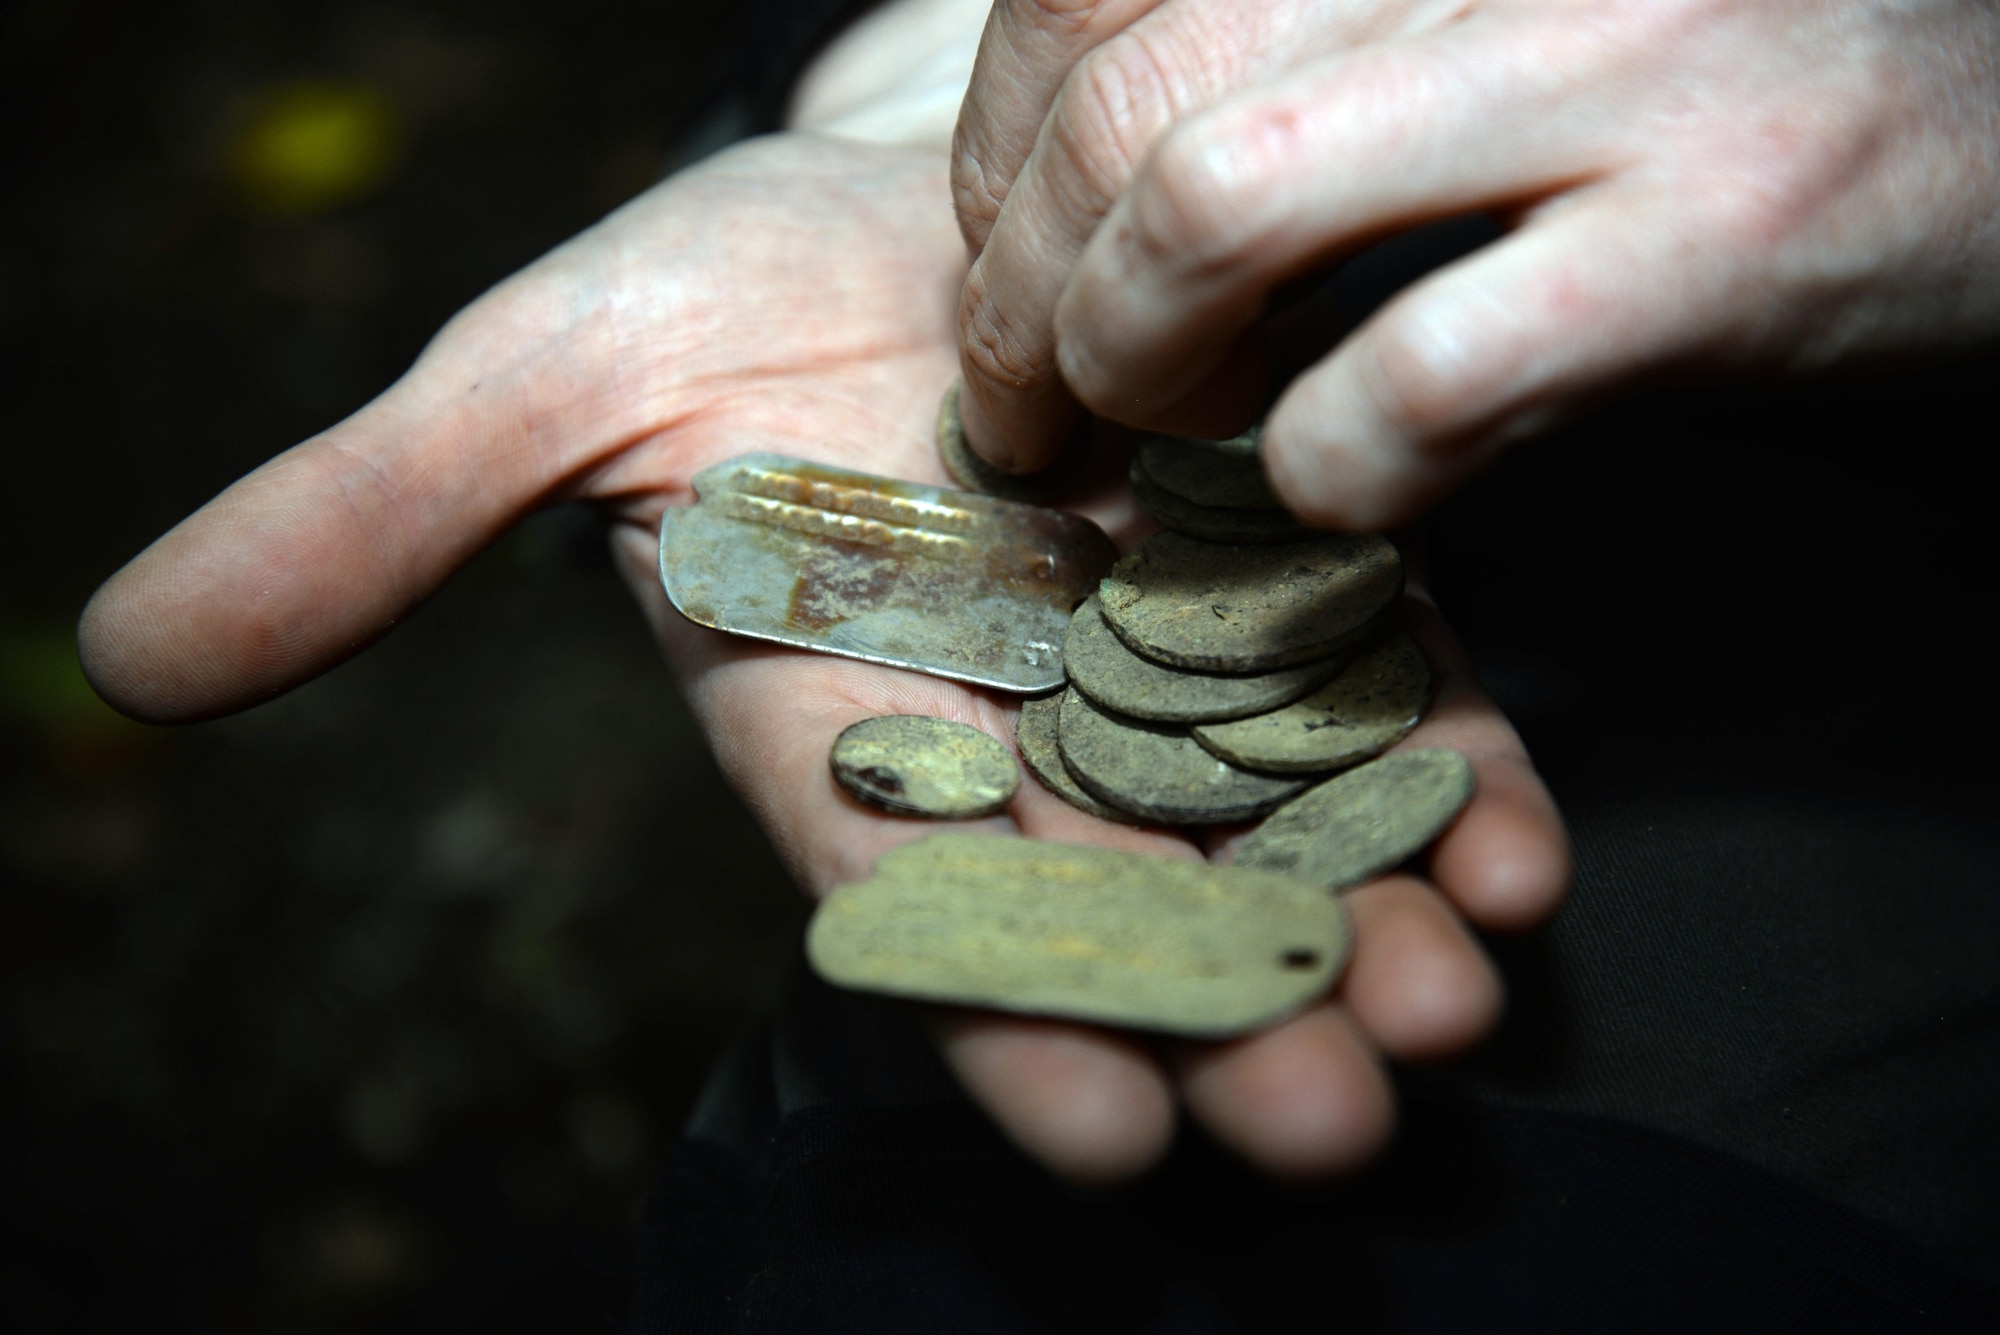 A volunteer hold dog tags and coins recovered from archeological dig